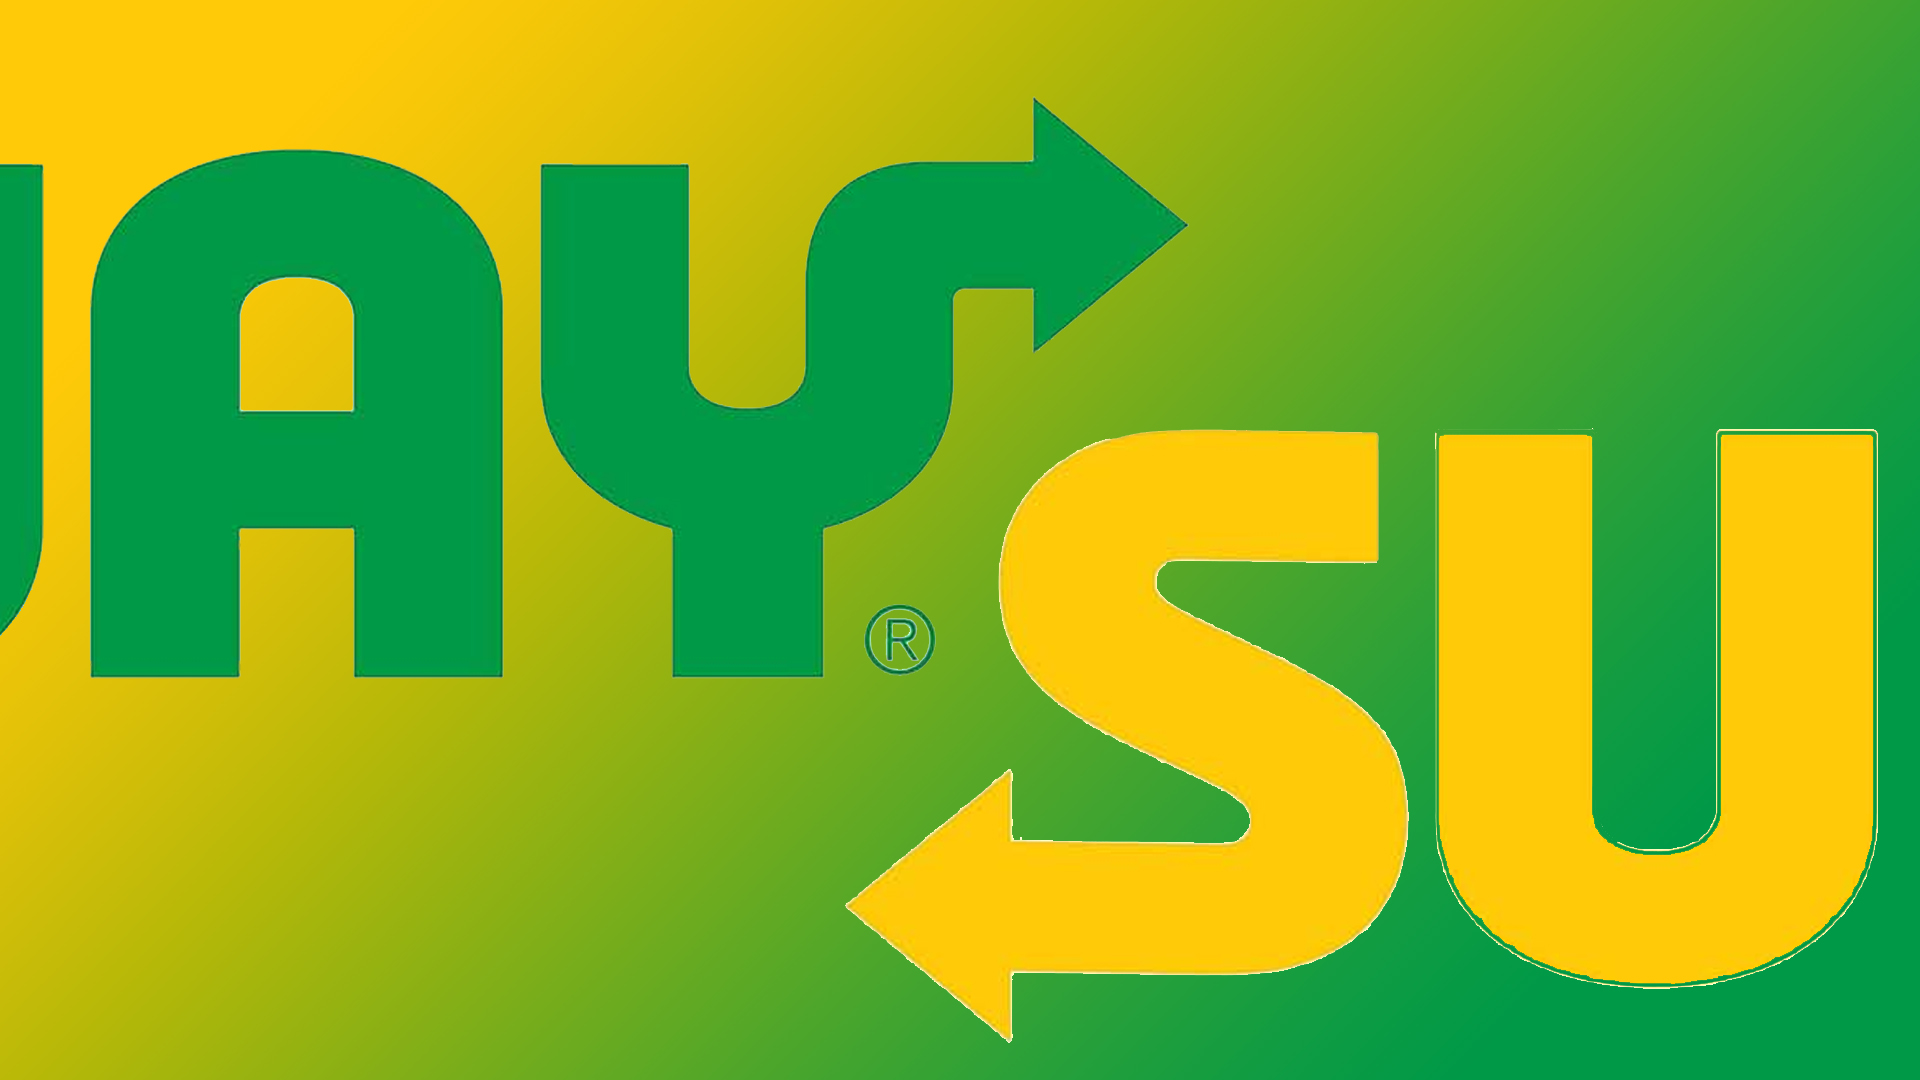 Subway Logo and symbol, meaning, history, PNG, brand